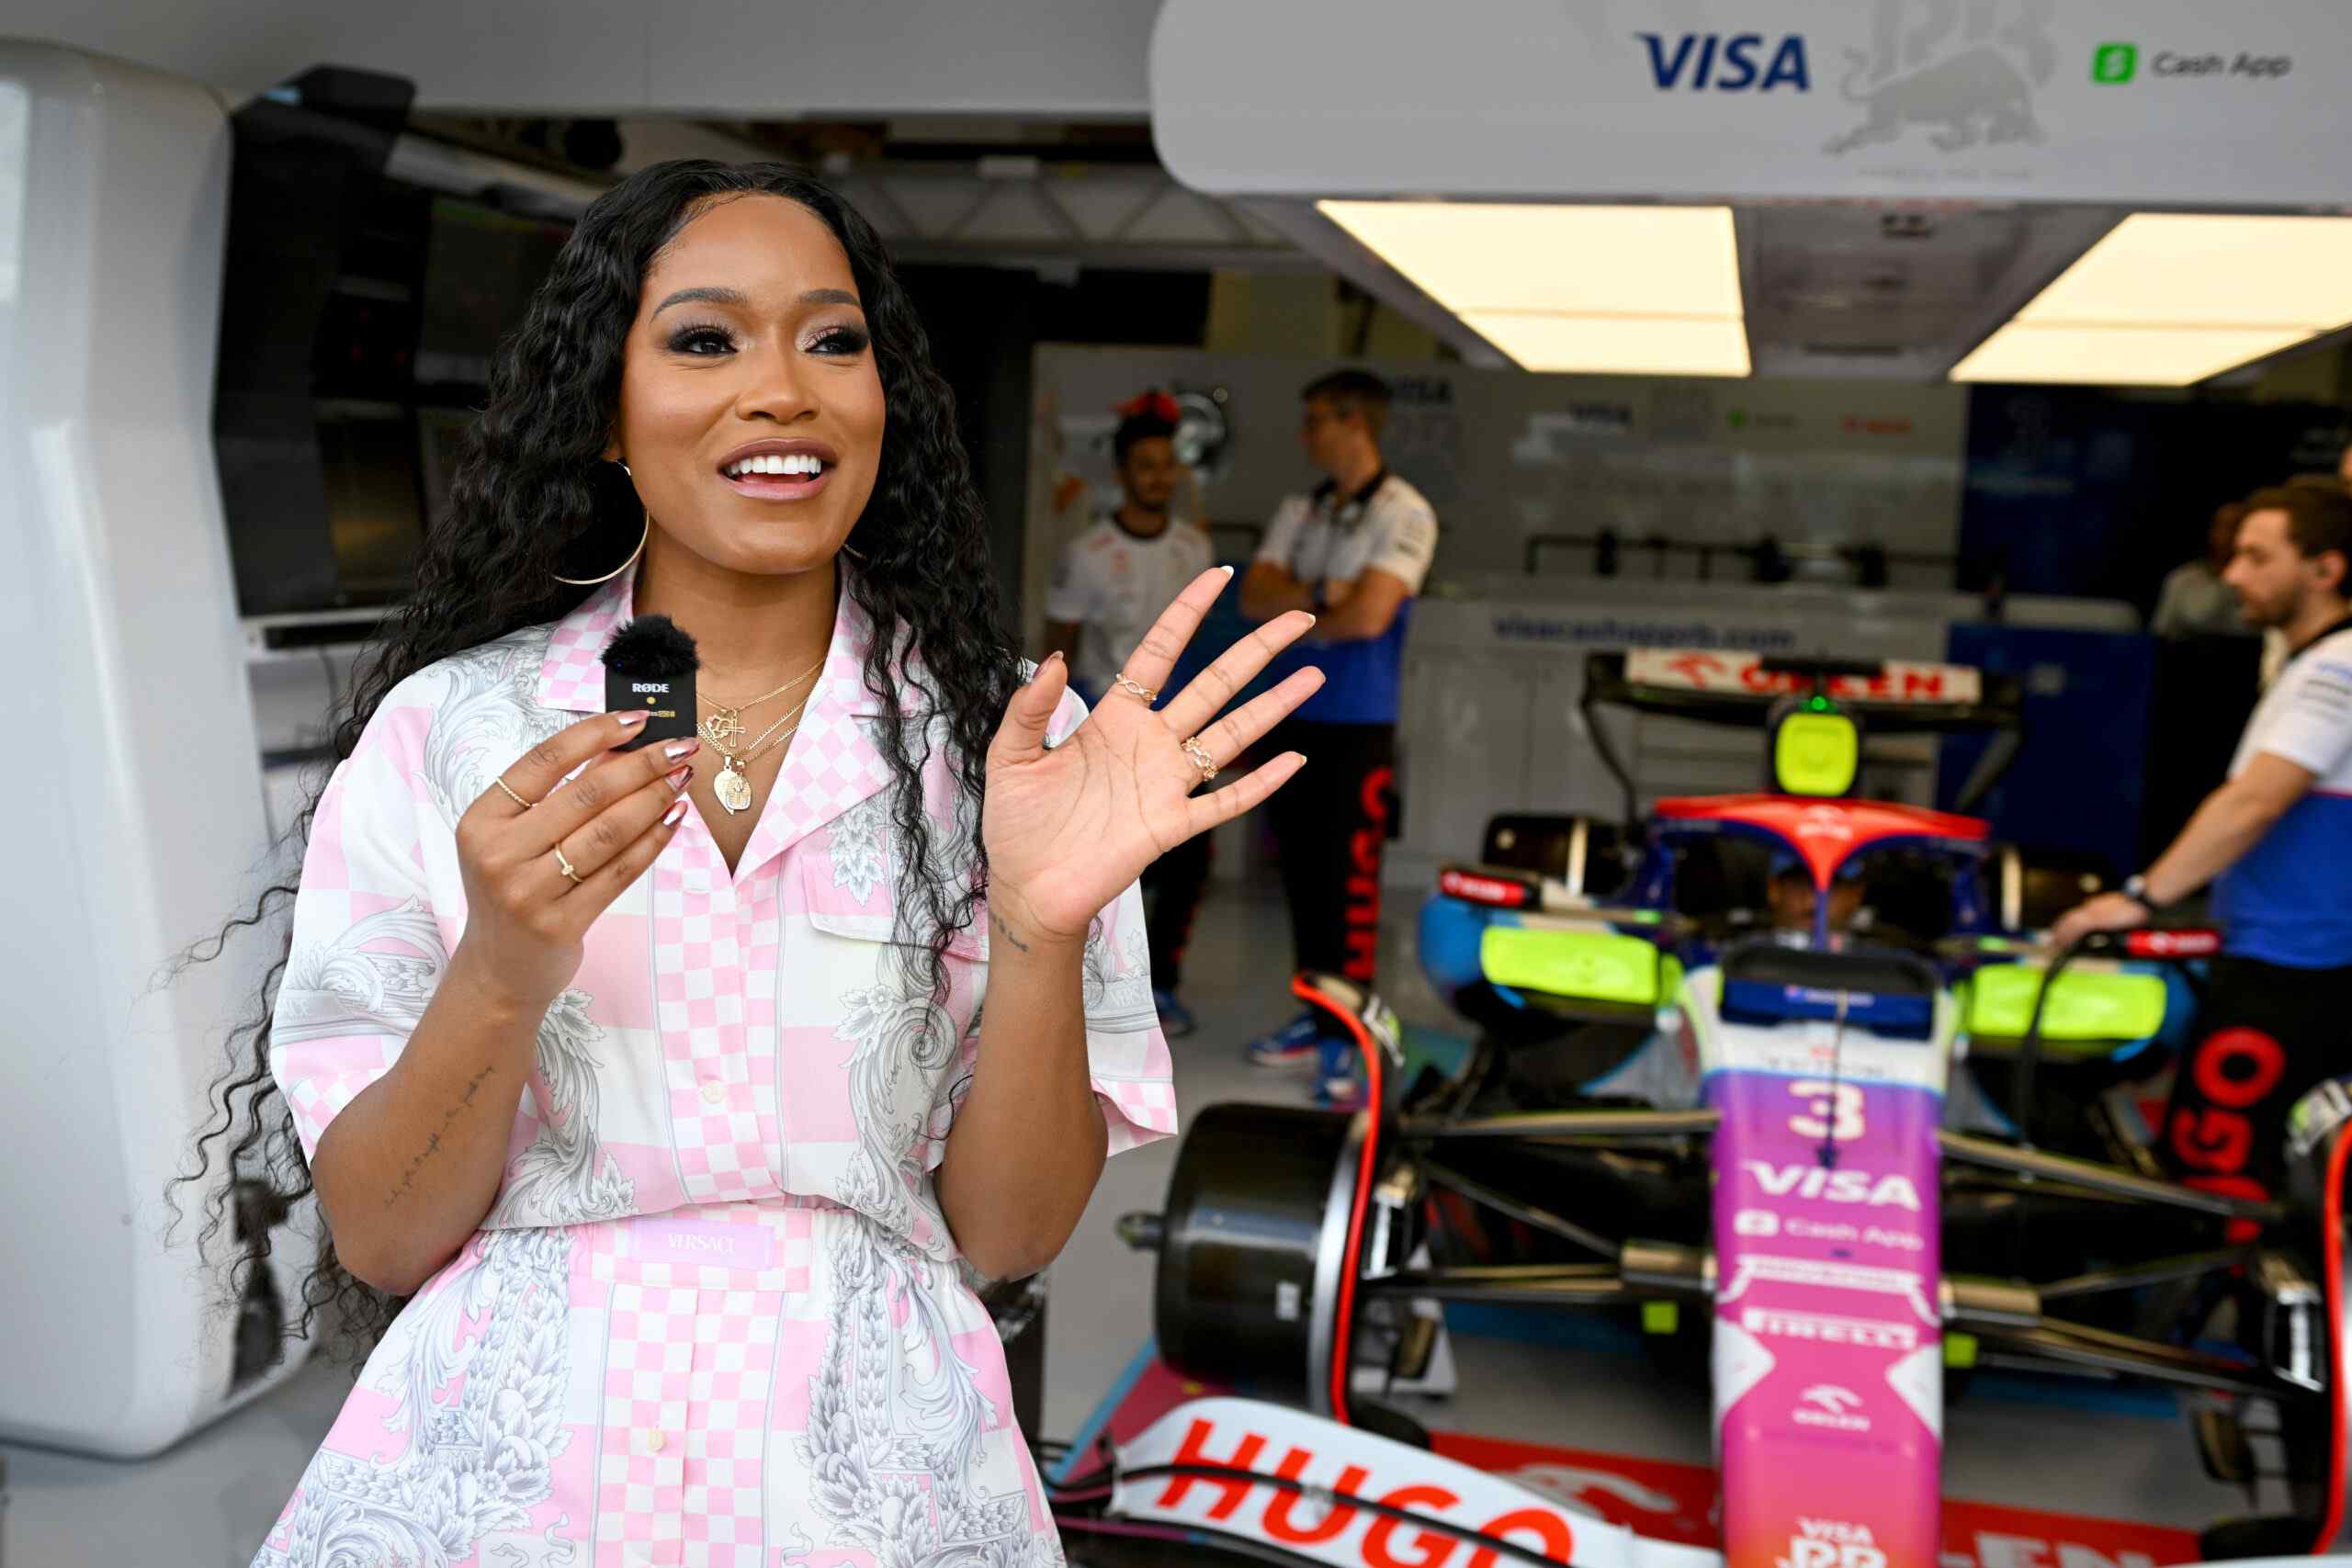 Keke Palmer On Her First Time At The Miami Grand Prix And Souvenirs She's Taking Her 1-Year-Old Son Leo